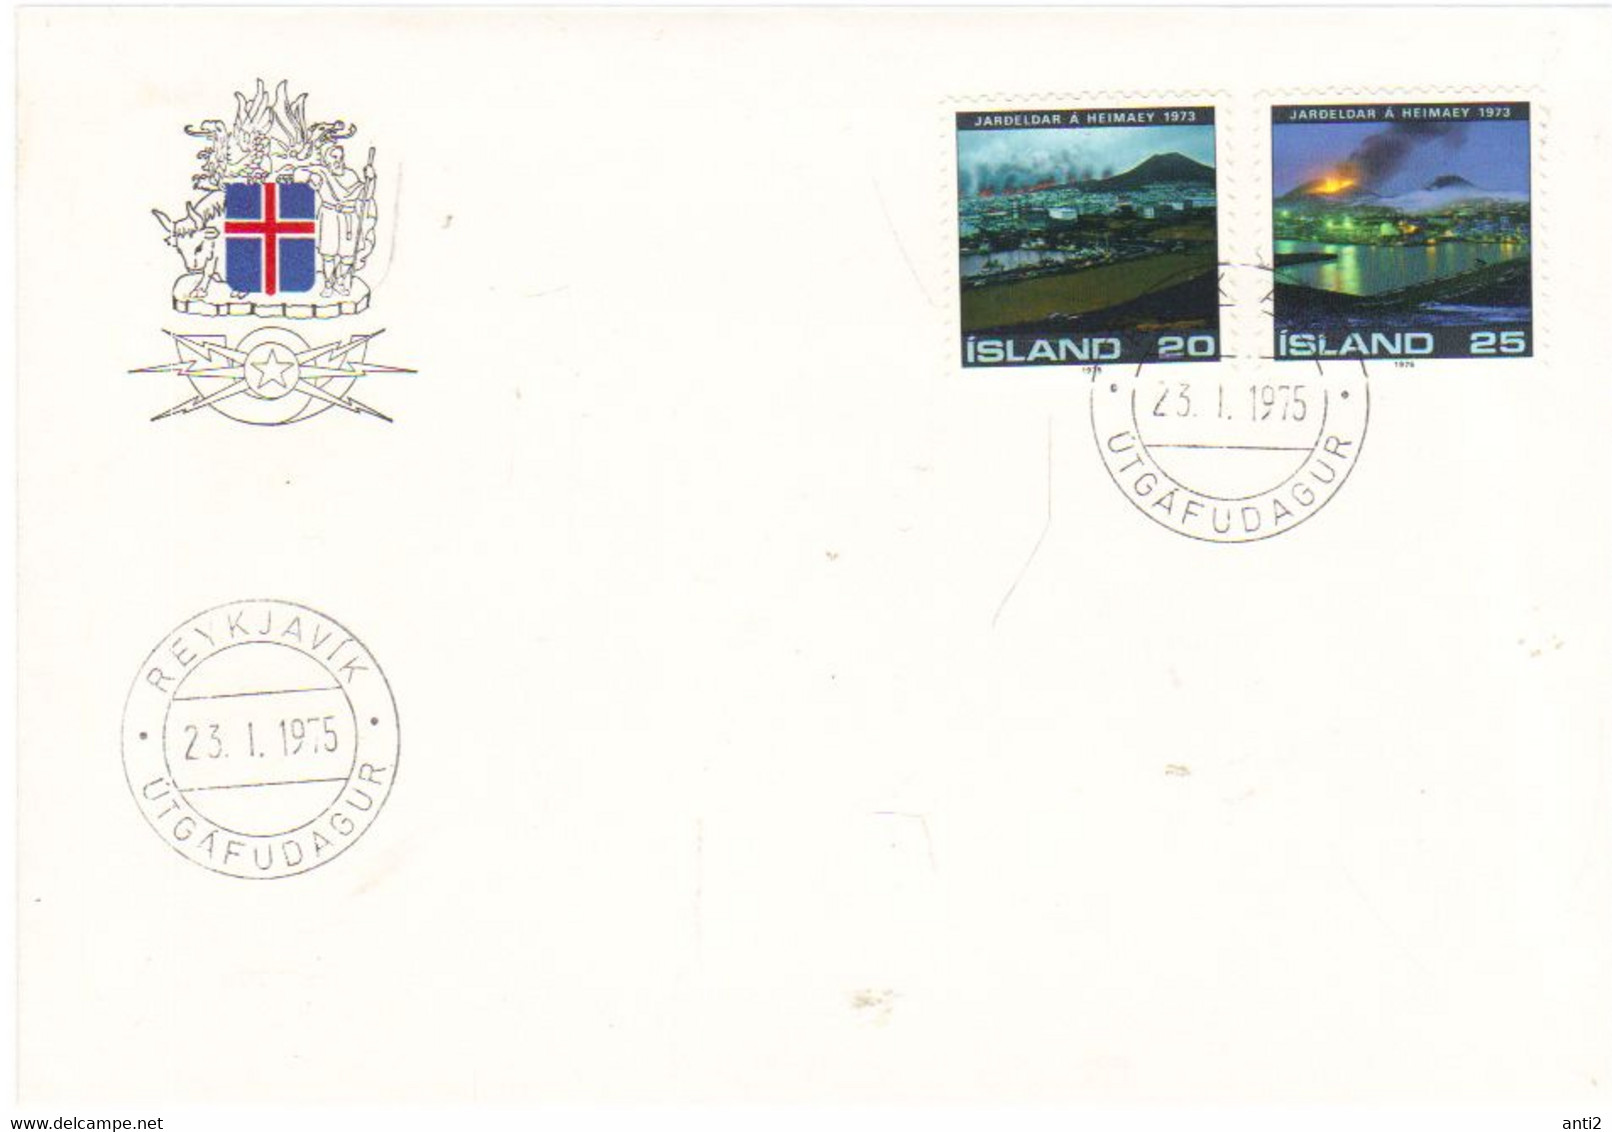 Iceland Island 1975 2nd Anniversary Of The Volcanic Eruption On Heimaey, MI 500-501 FDC - Covers & Documents